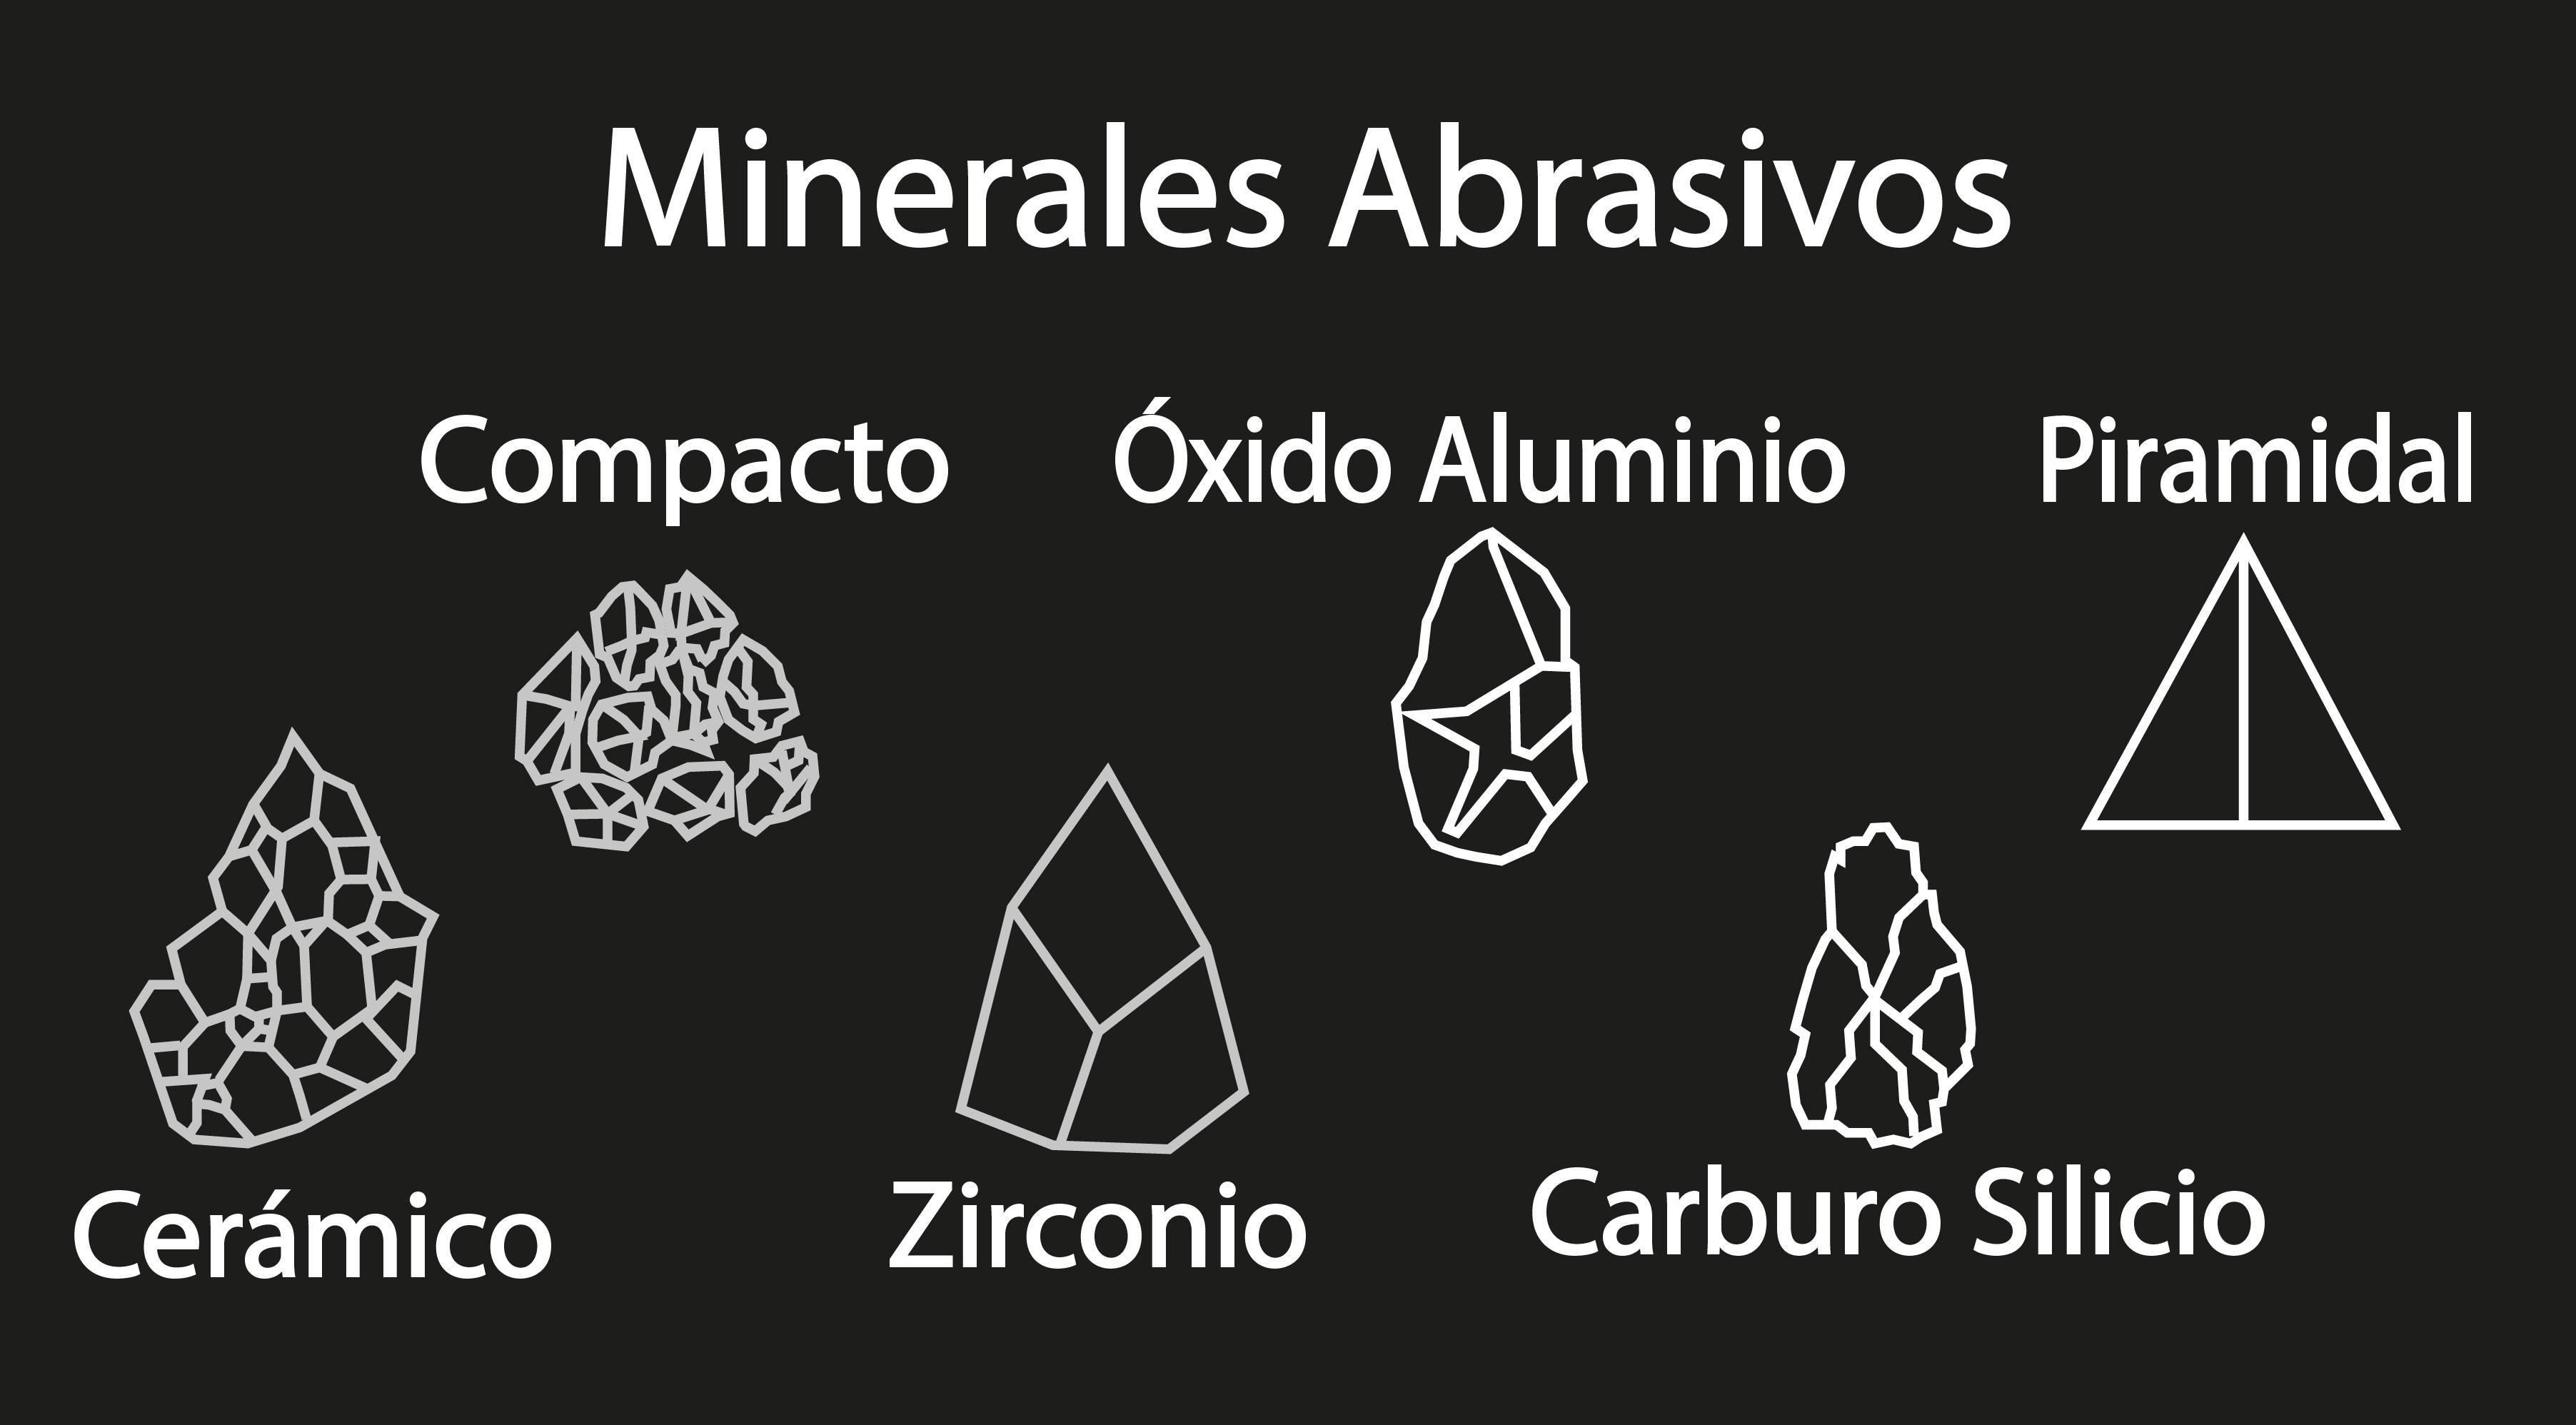 Why we should know more about abrasive minerals